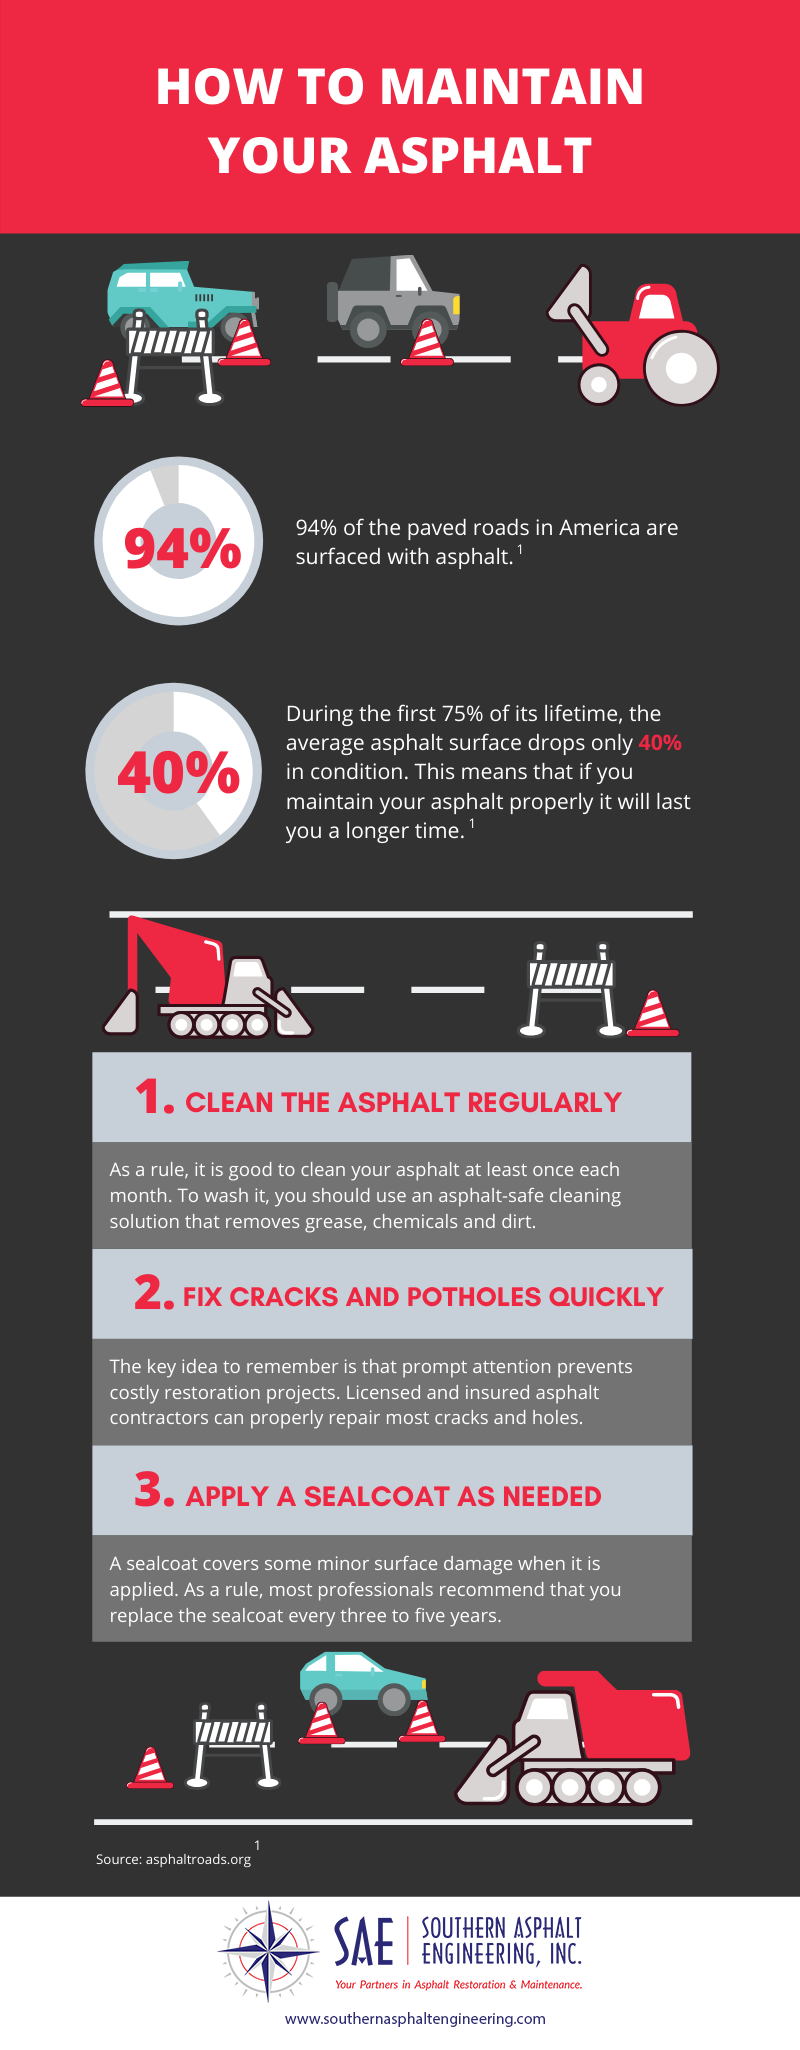 How to Maintain Your Asphalt infographic